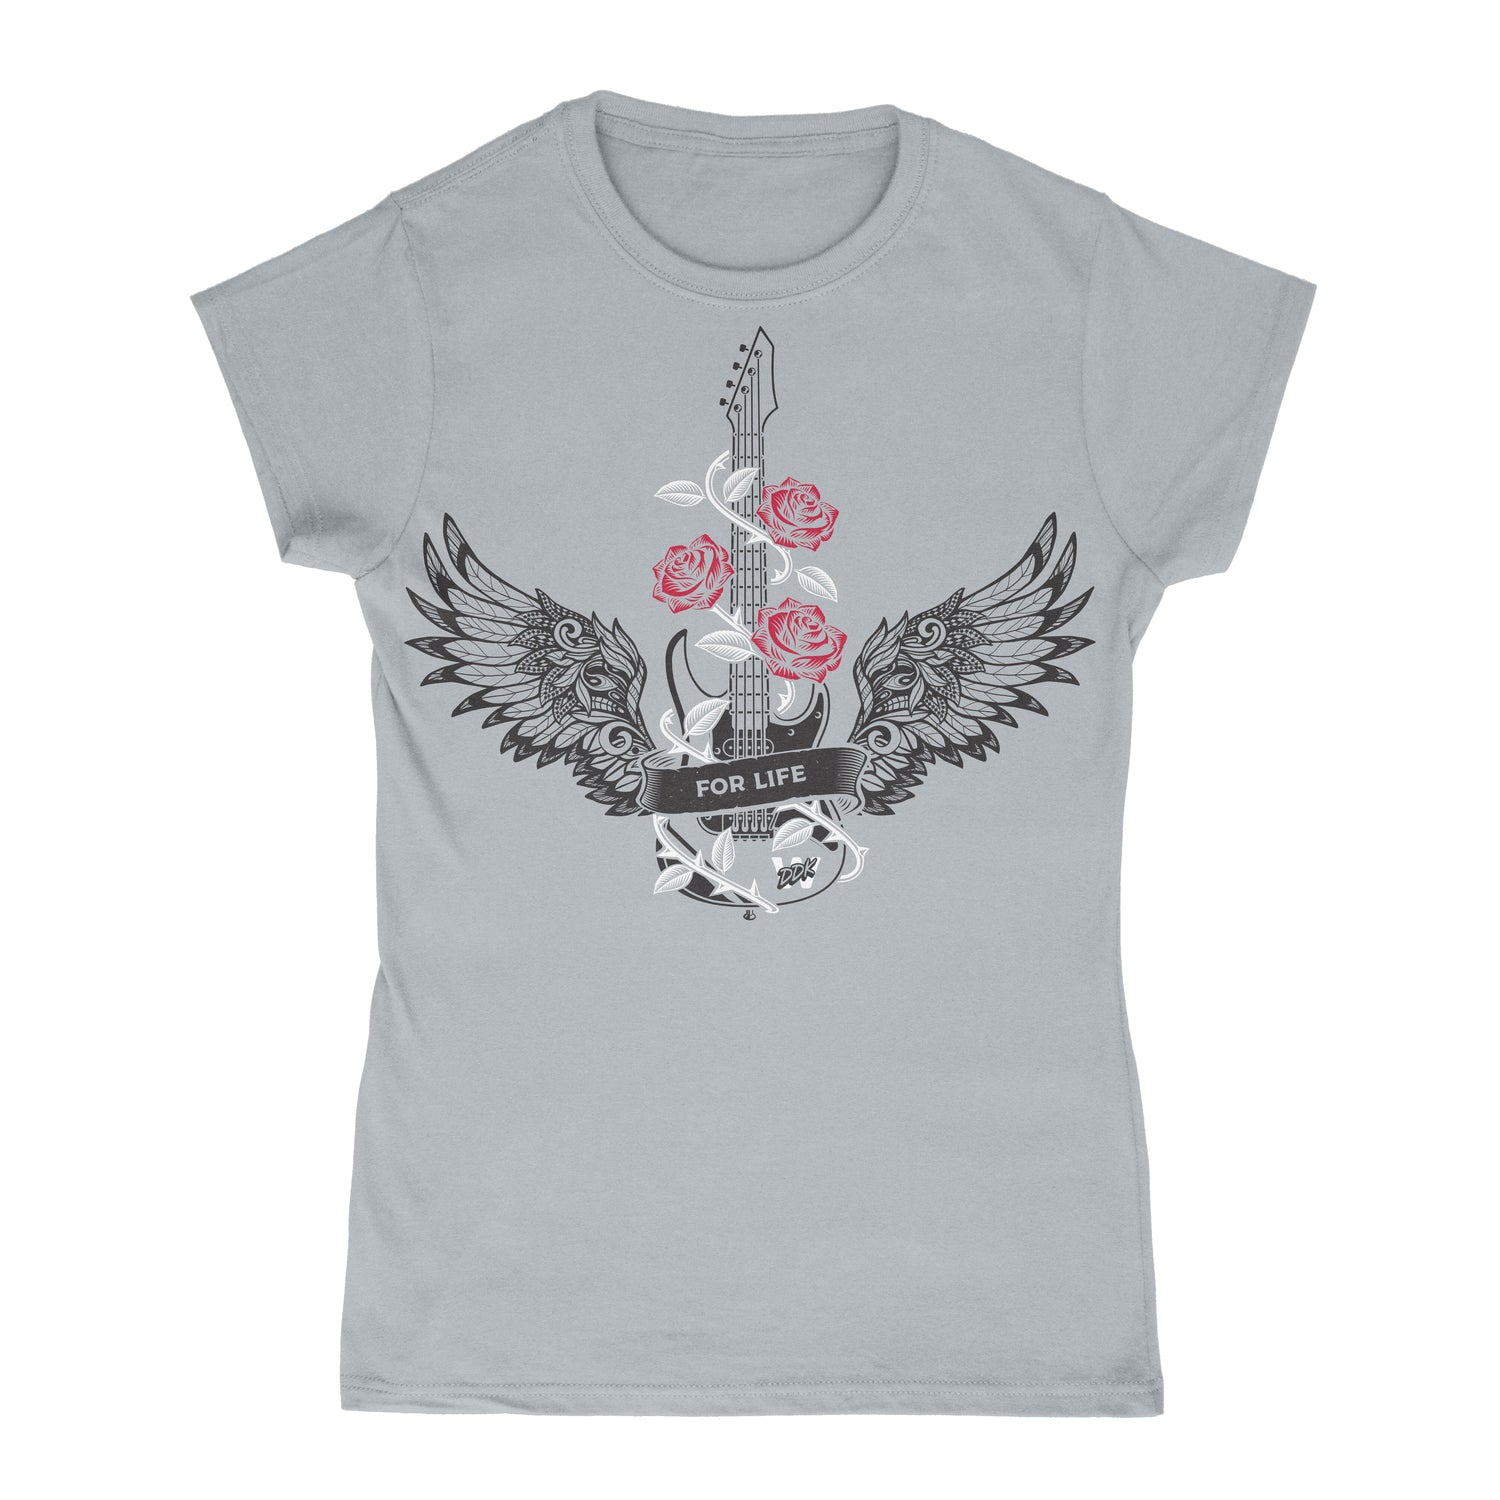 DDK women's t-shirt top with music angel wings rock and roll themes